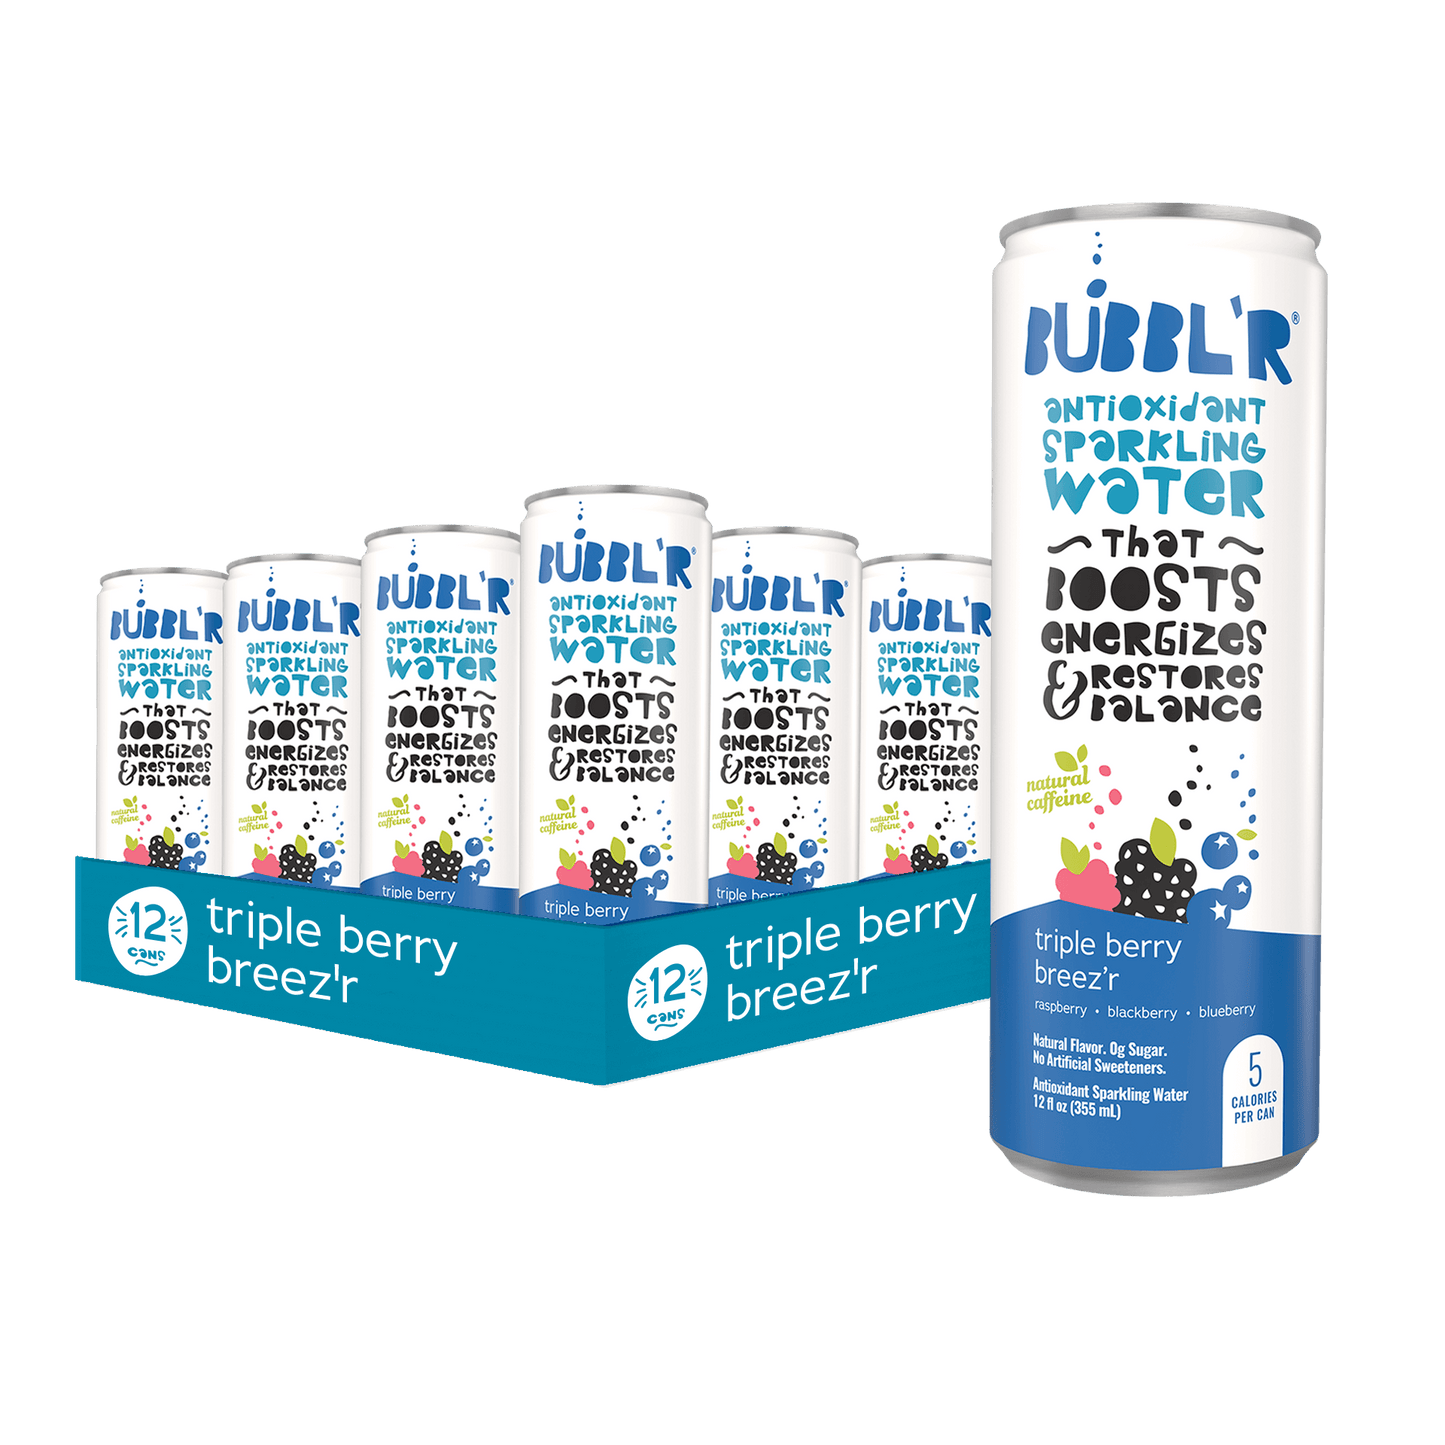 triple berry flavor 12 pack of bubbl'r cans